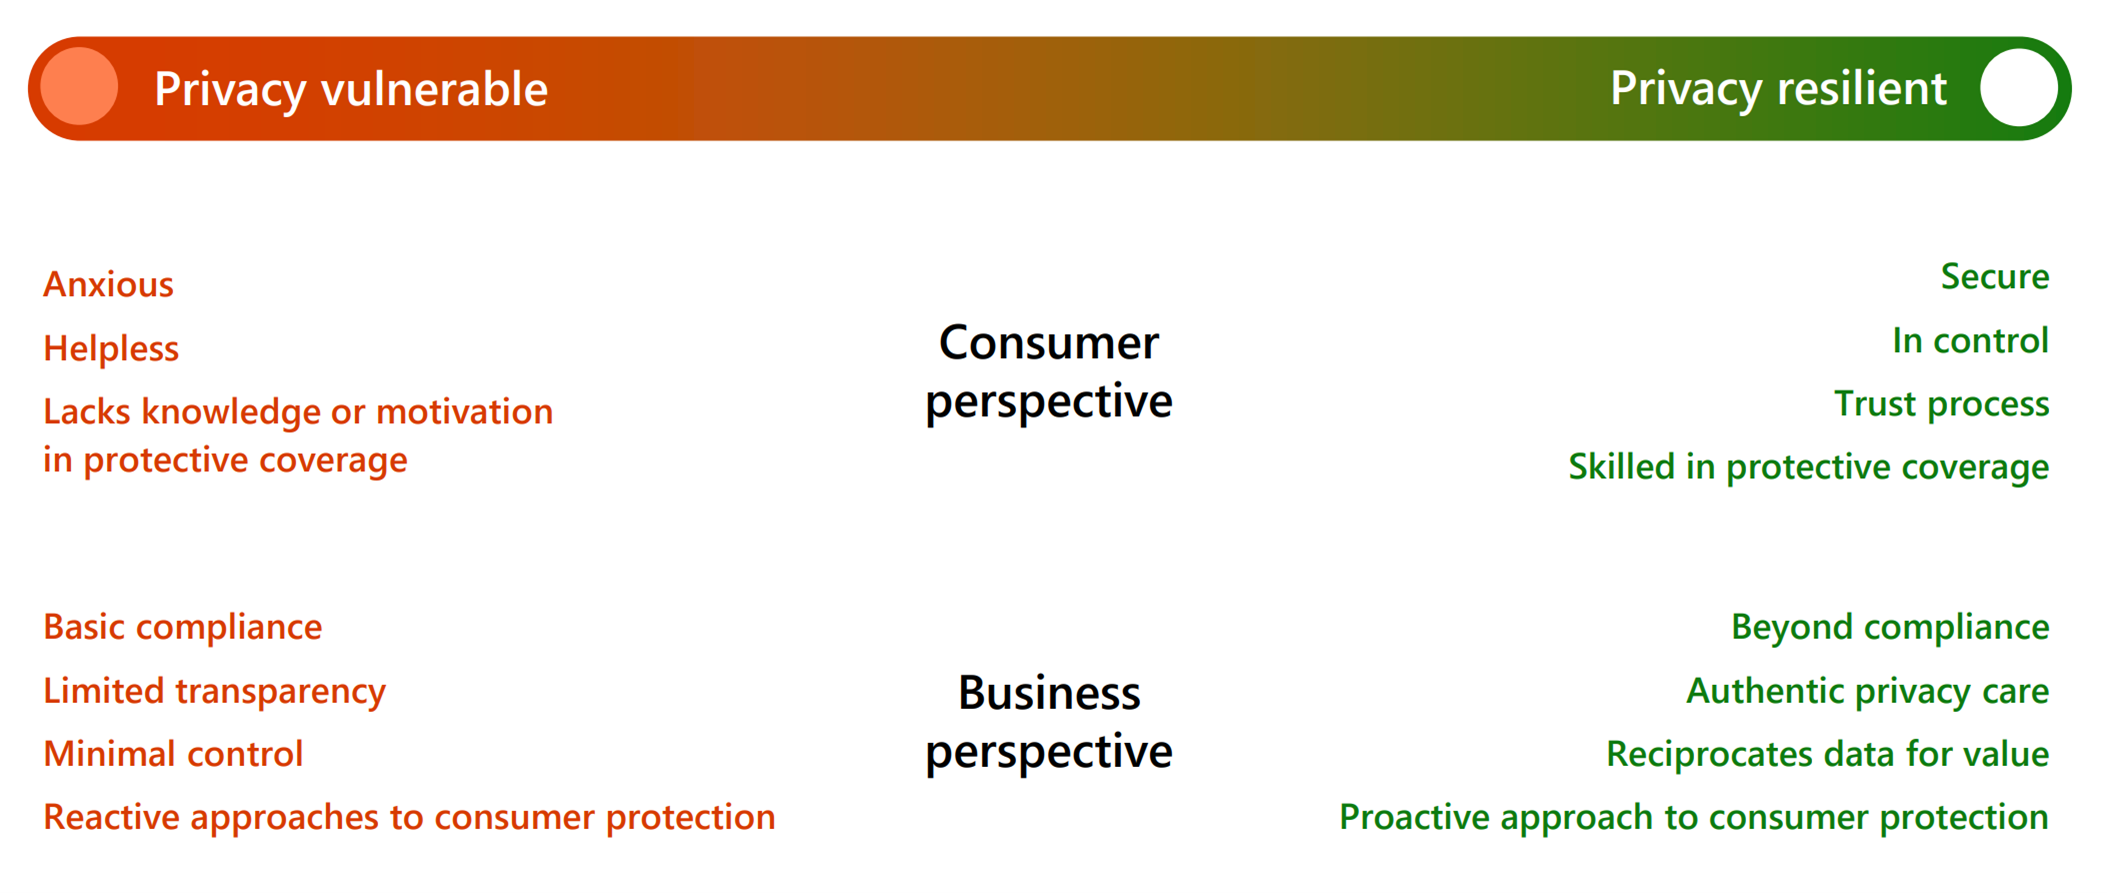 Gradient scale bar showing Privacy vulnerable on one end and Privacy resilient on the other. The scale is from the consumer perspective and the business perspective.